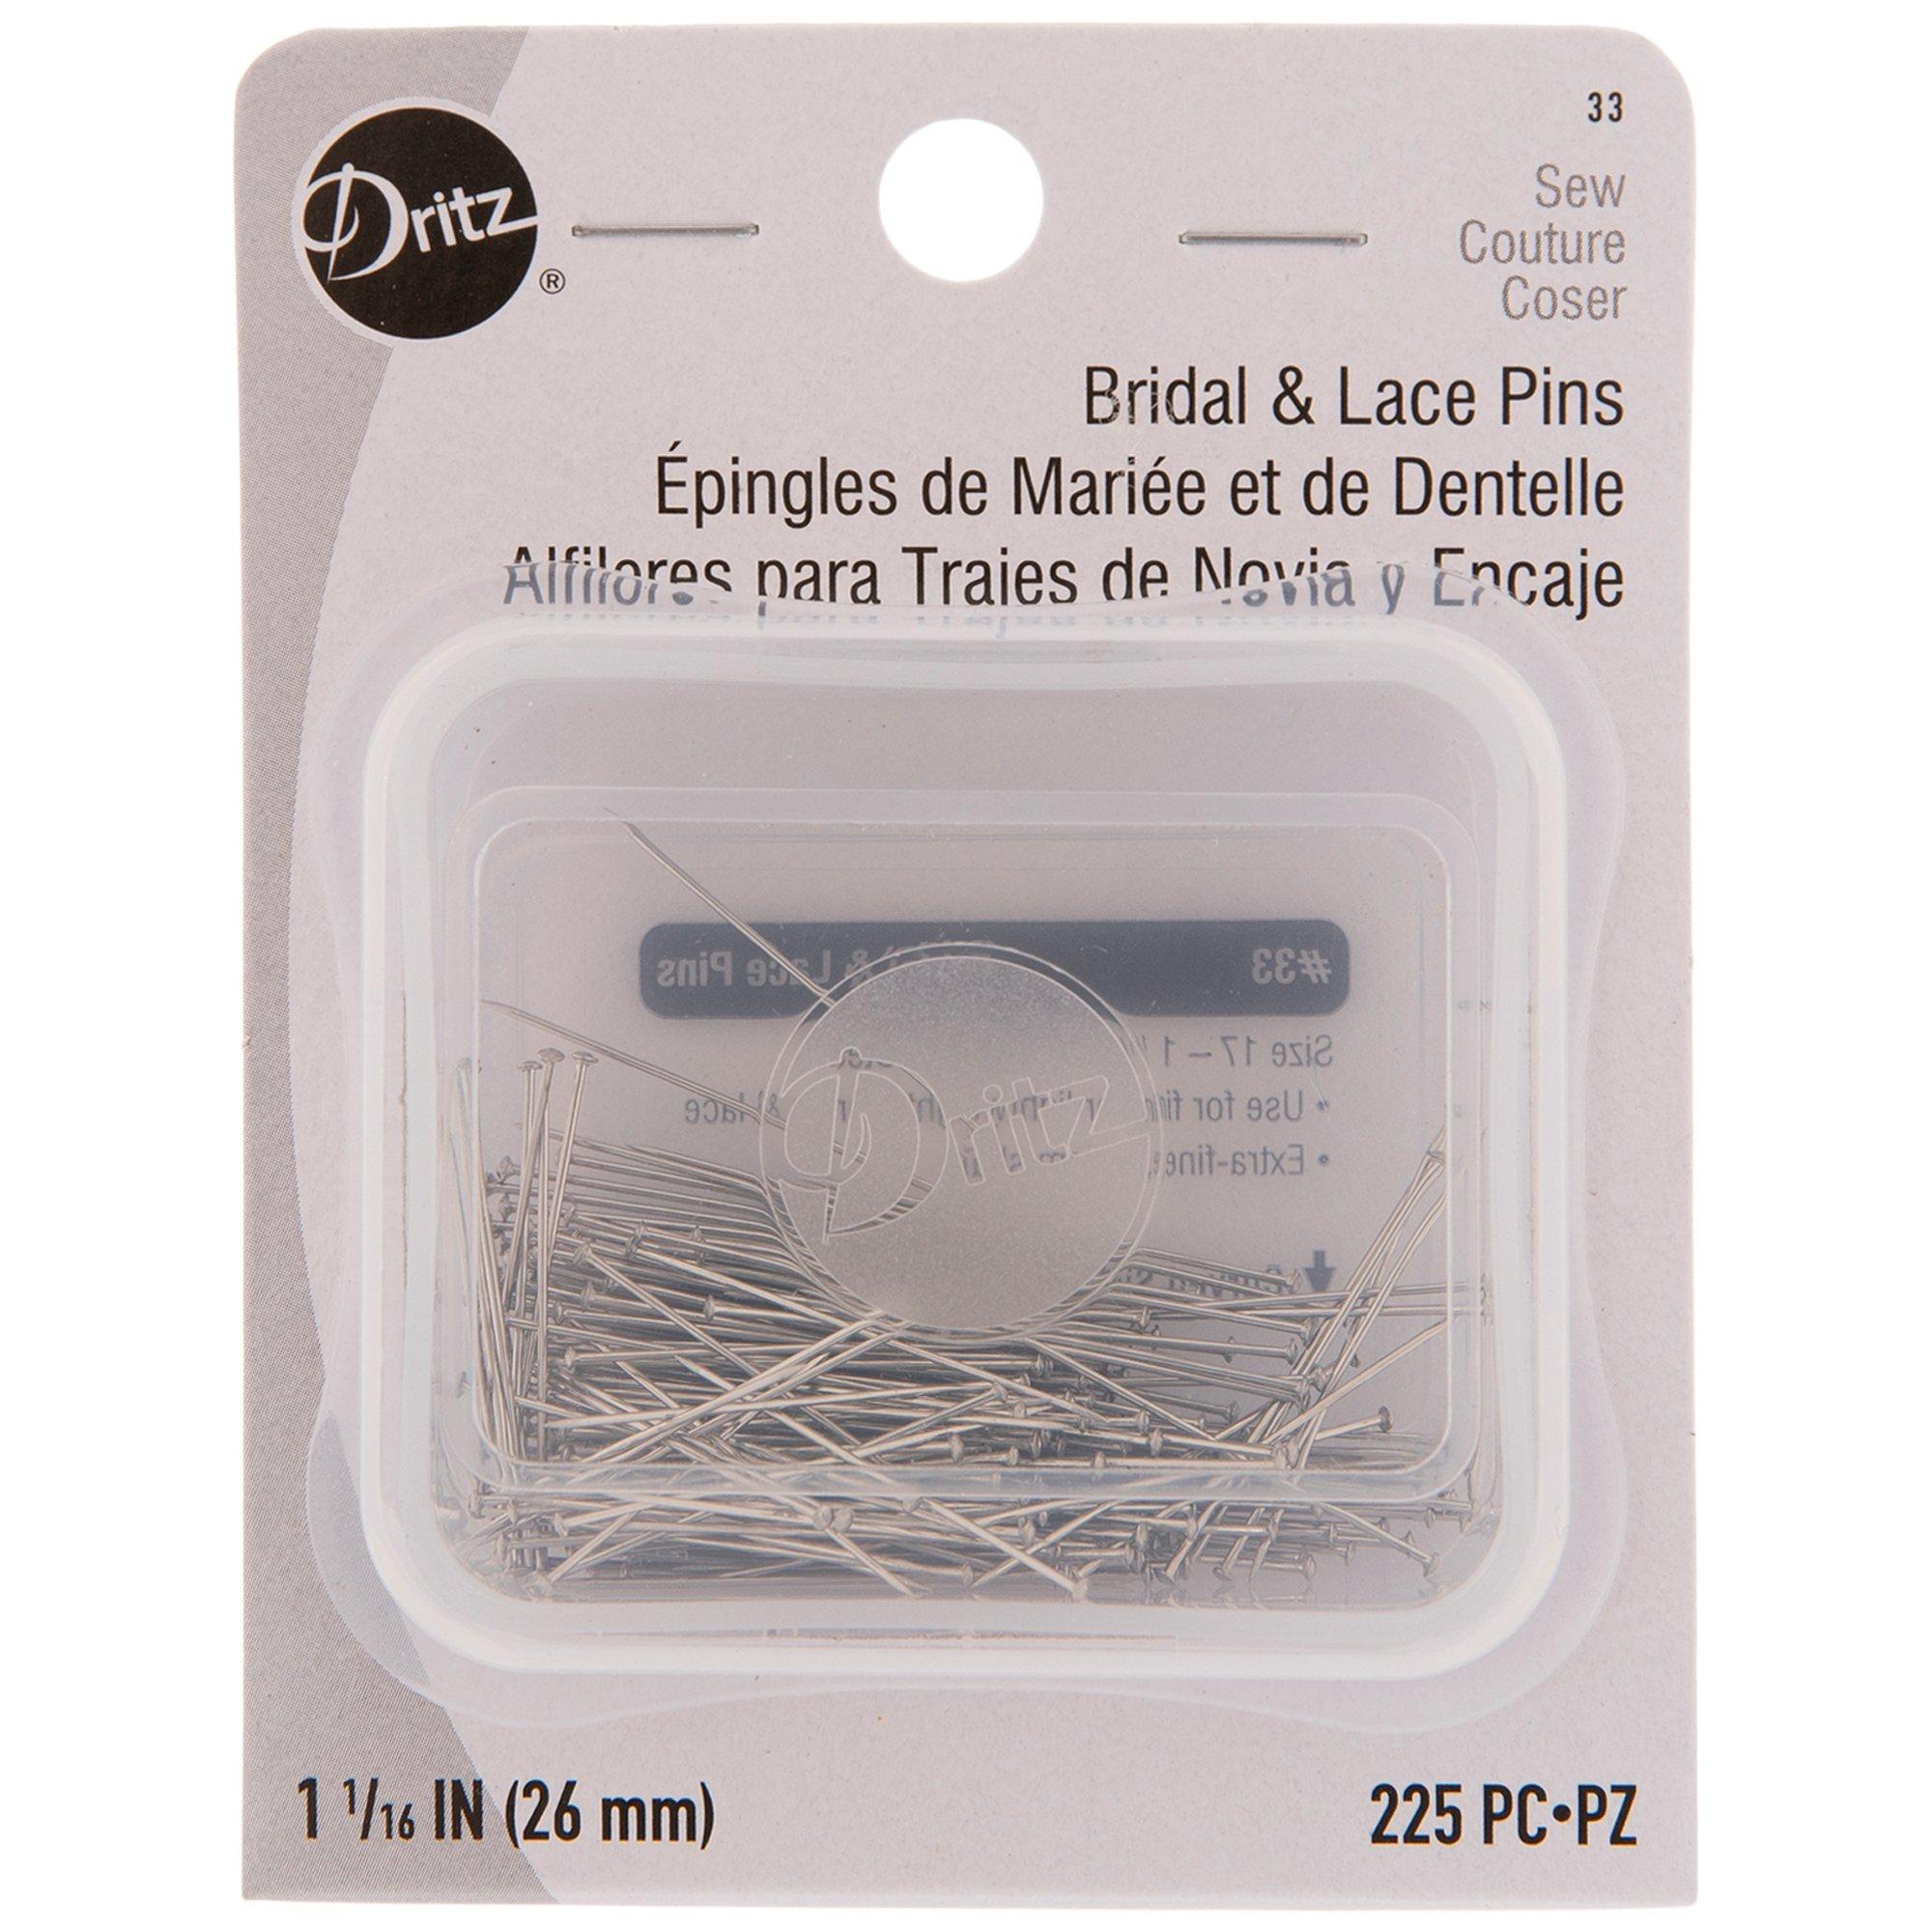 Coiless Safety Pins, Hobby Lobby